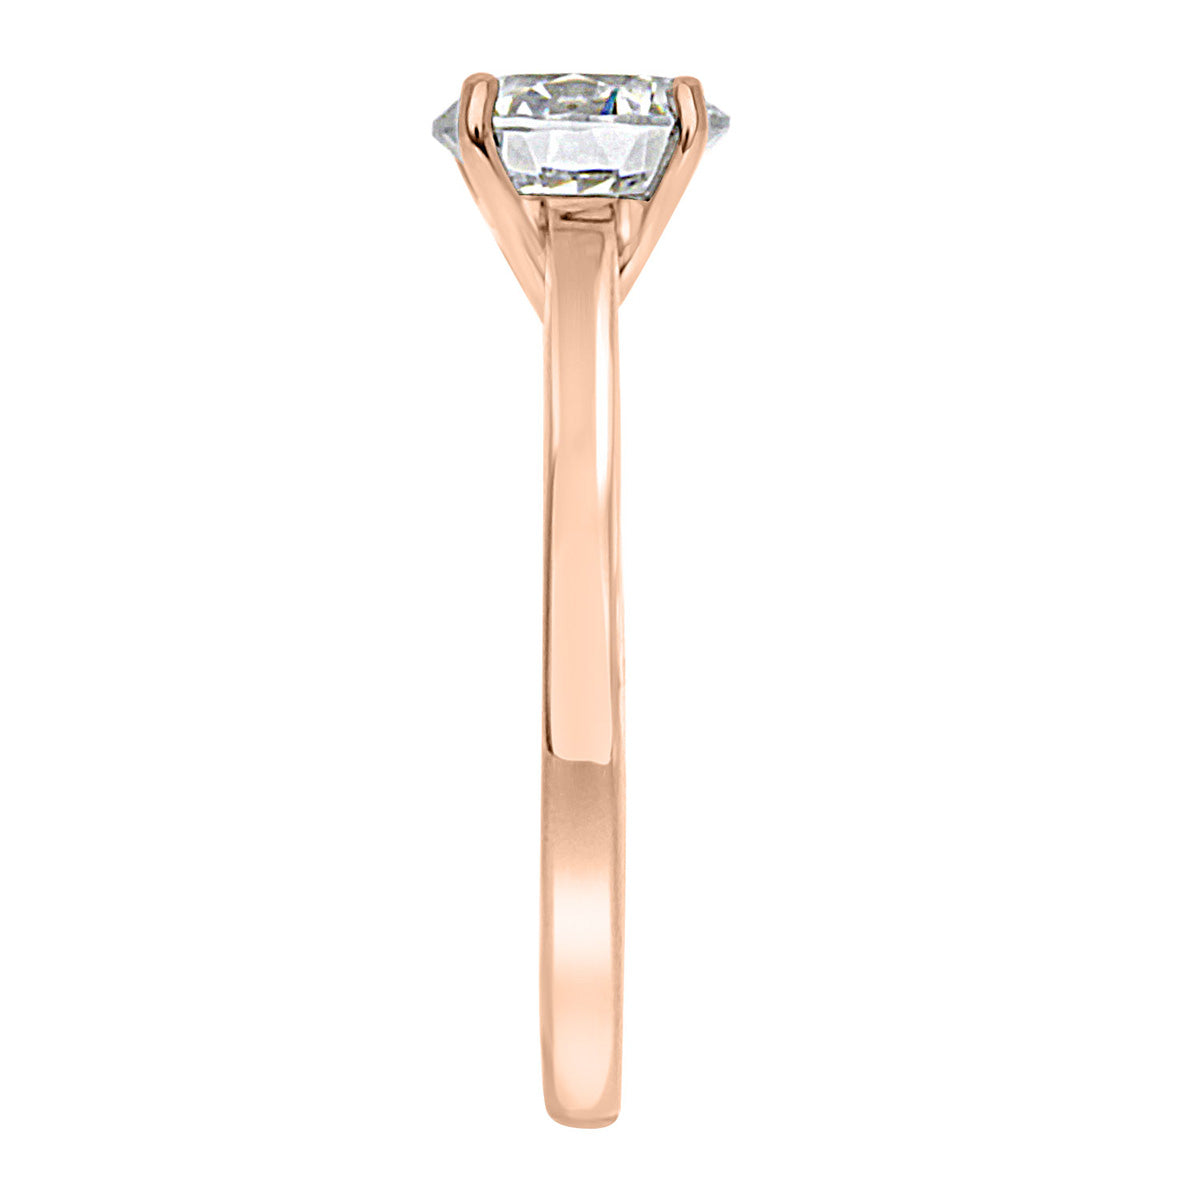 Solitaire Engagement Ring in rose gold pictured upright from a side view